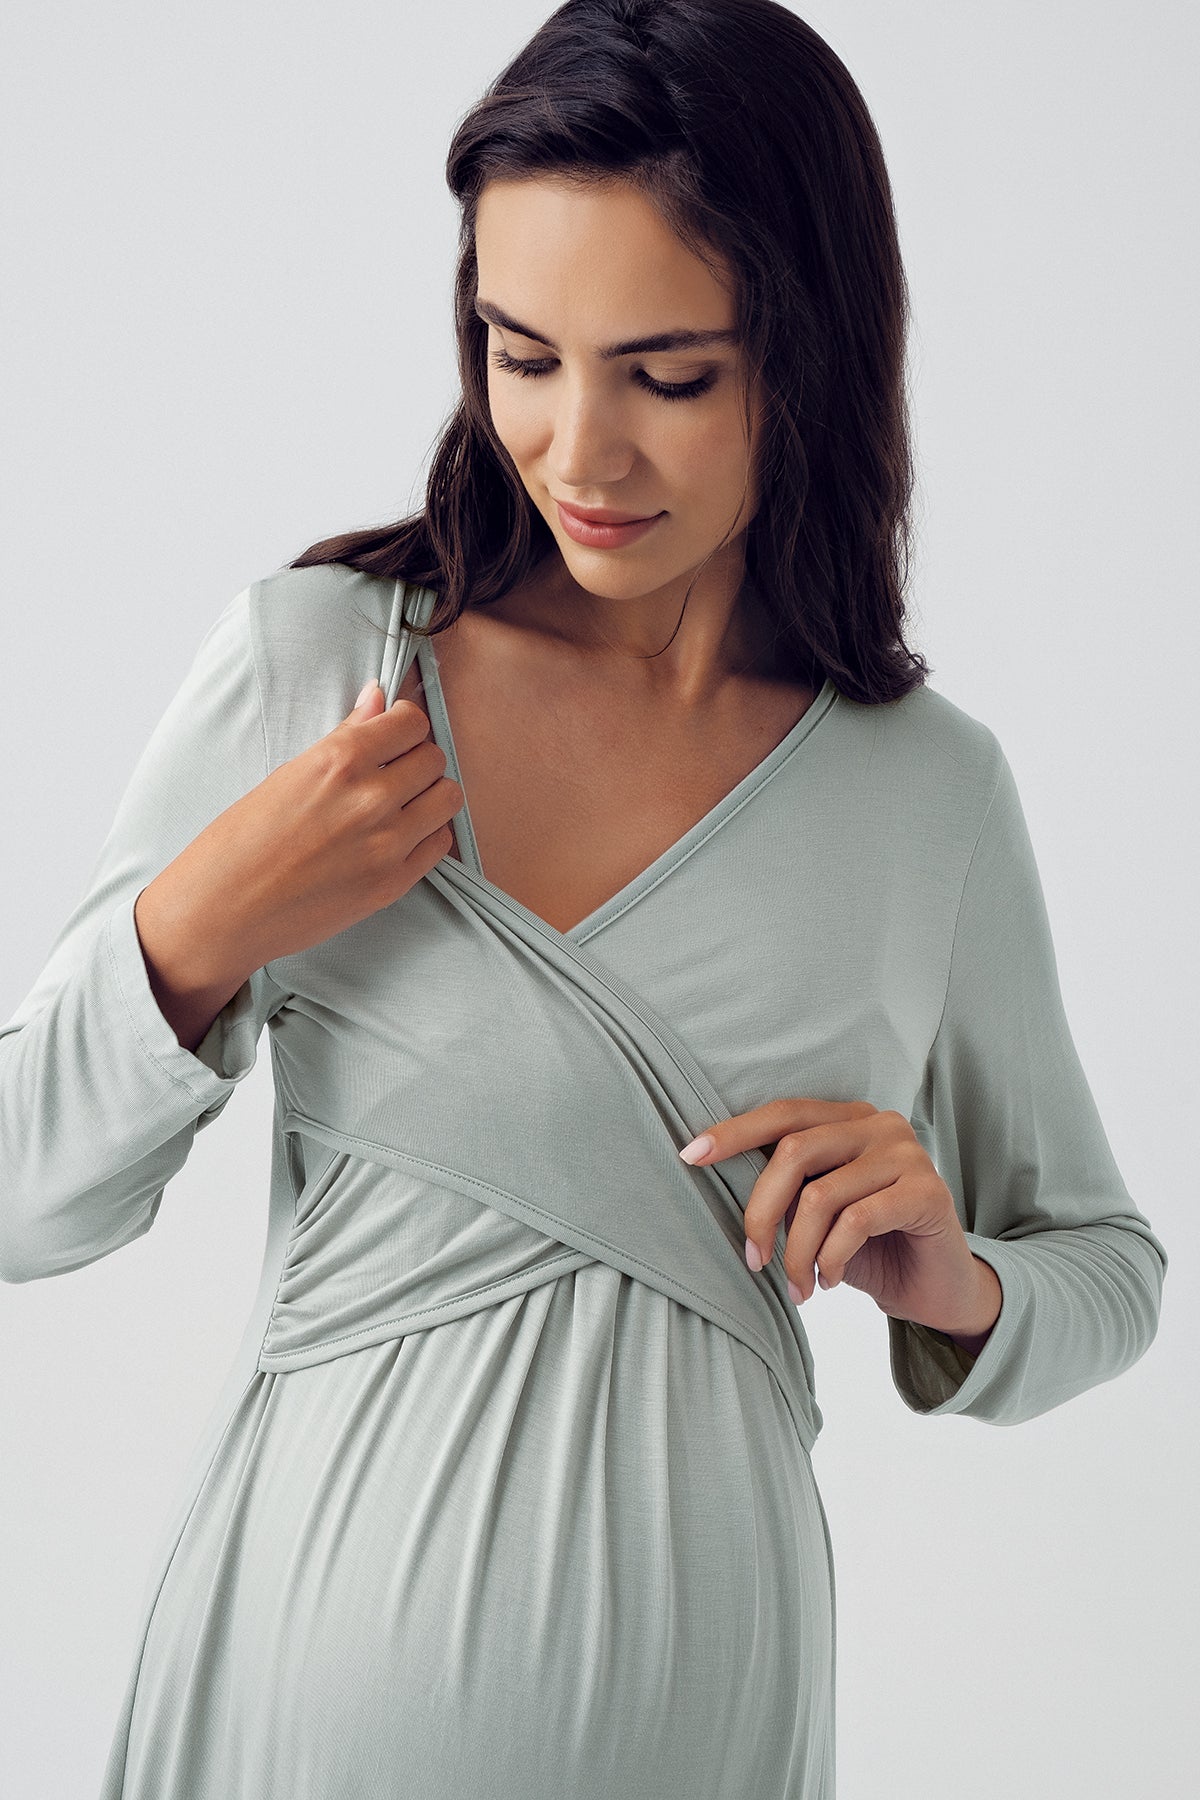 Shopymommy 15105 Cross Double Breasted Maternity & Nursing Nightgown Green